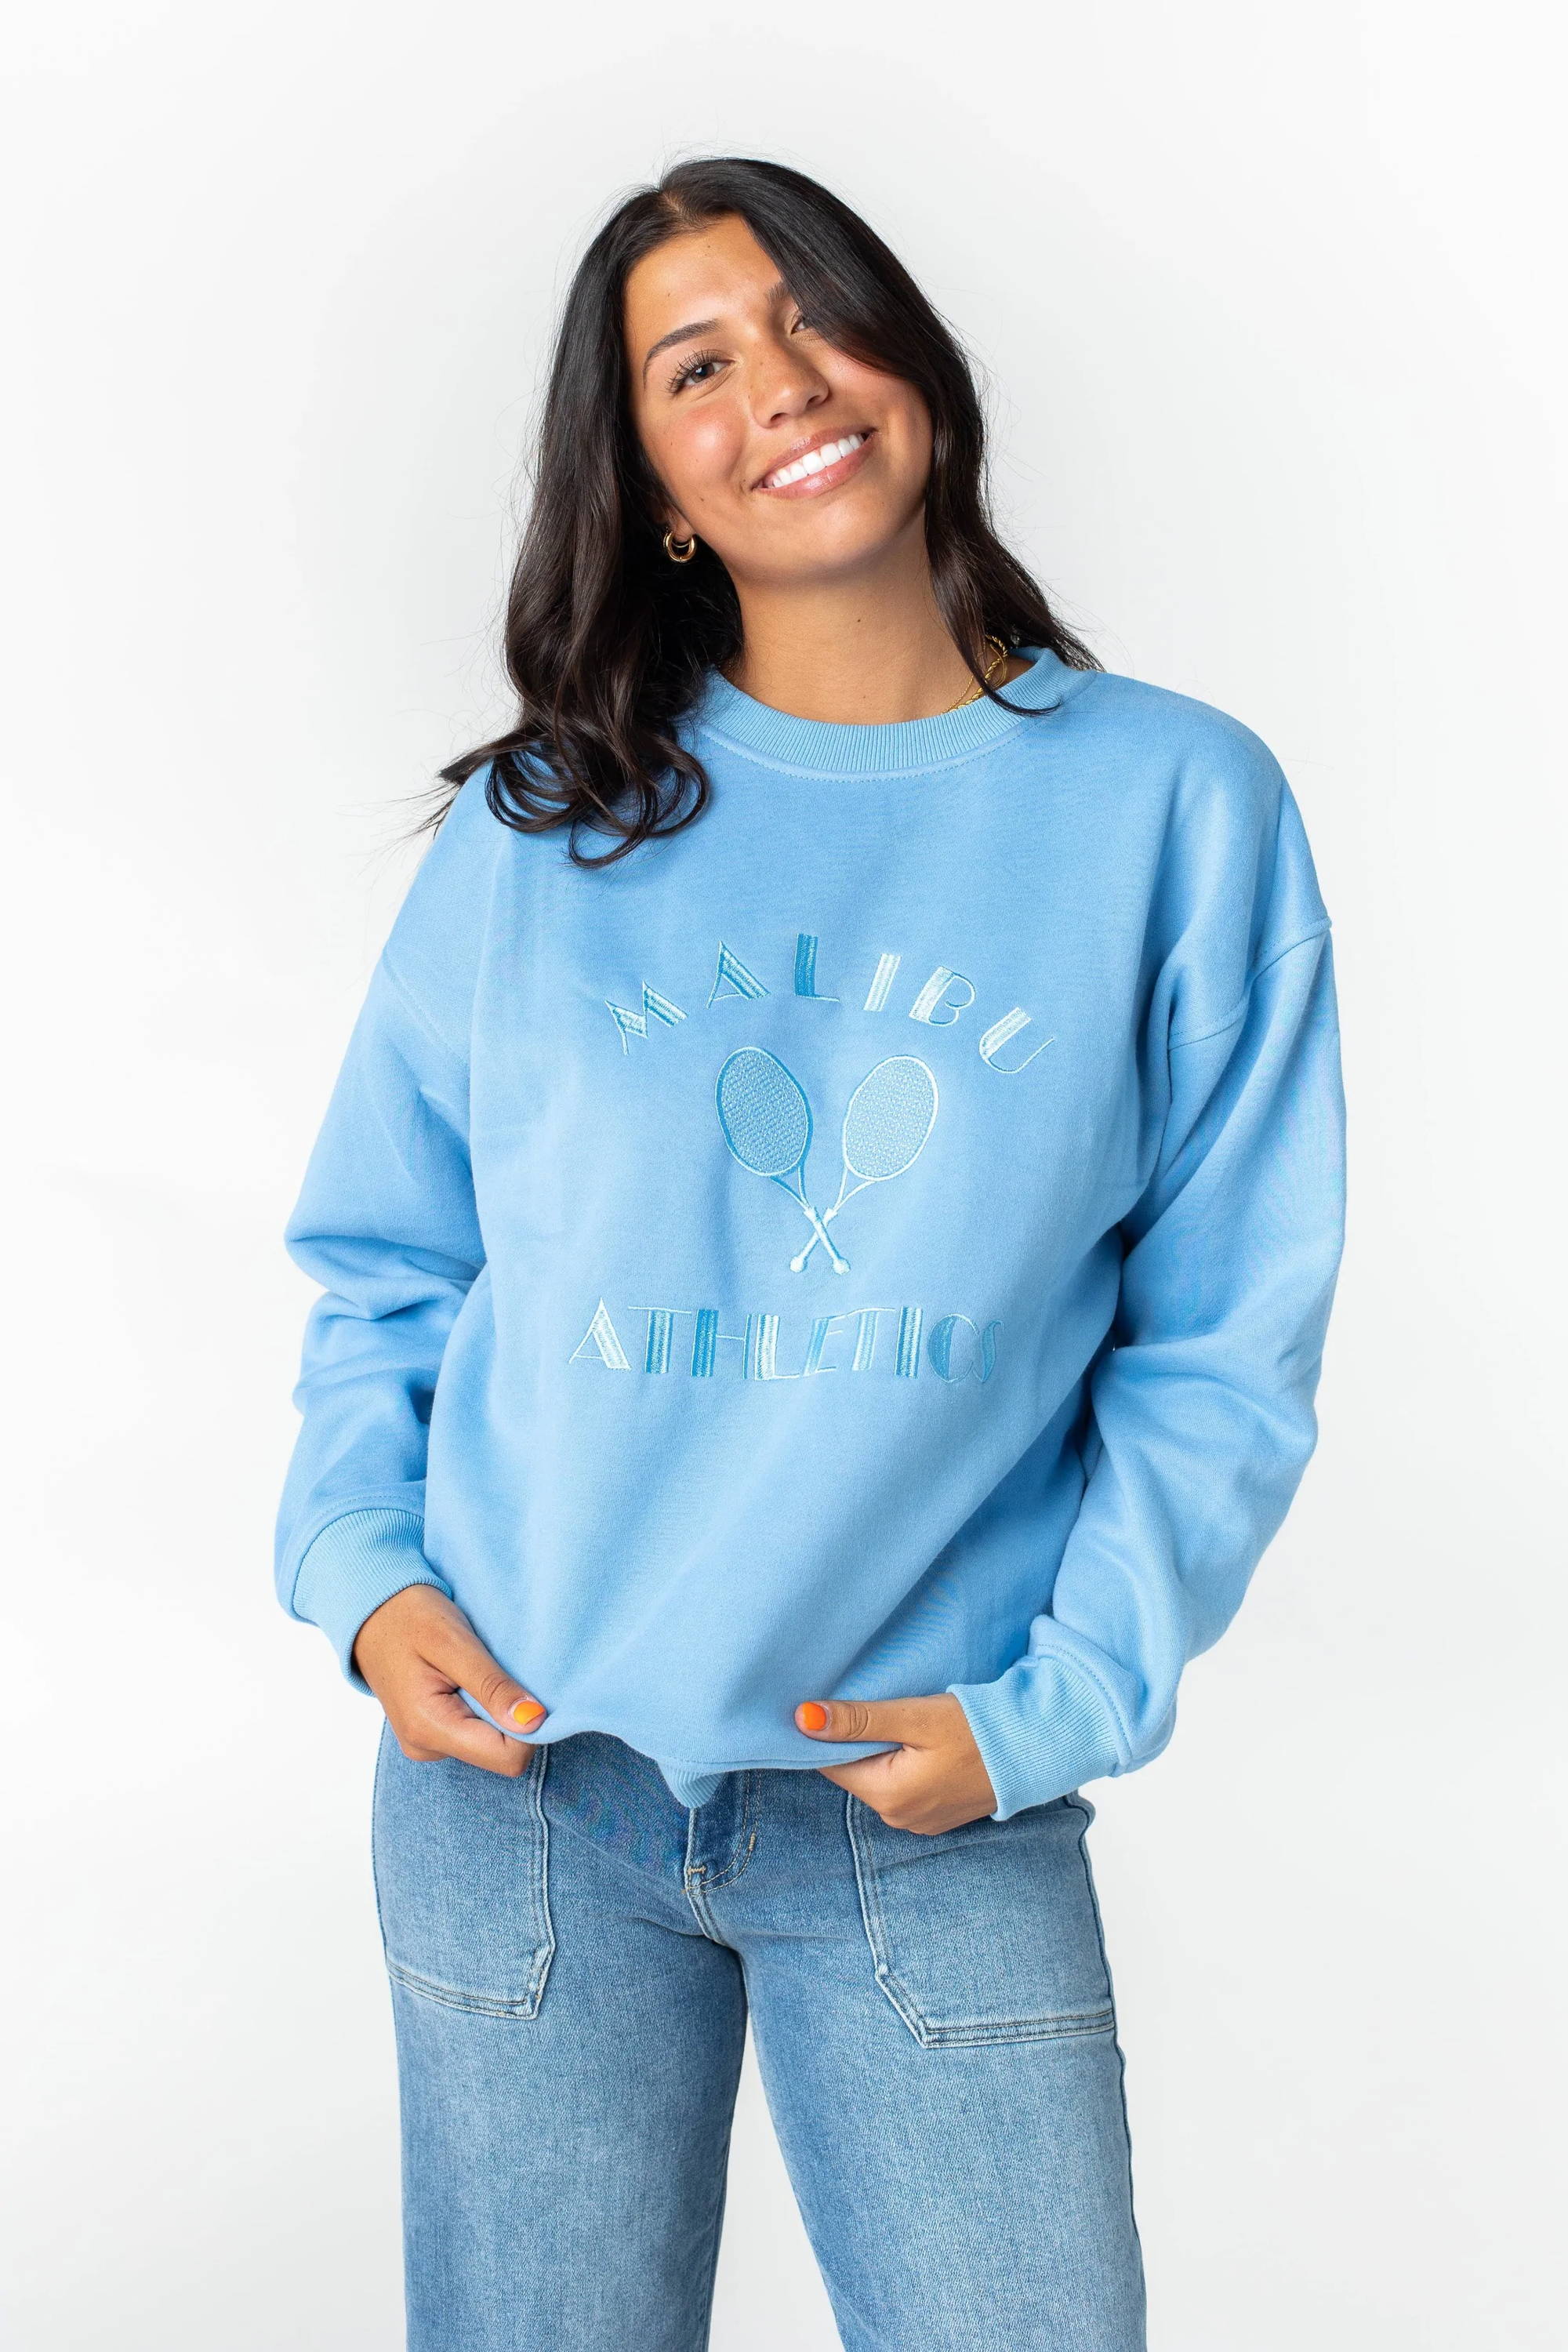 A woman poses in a blue sweatshirt and jeans